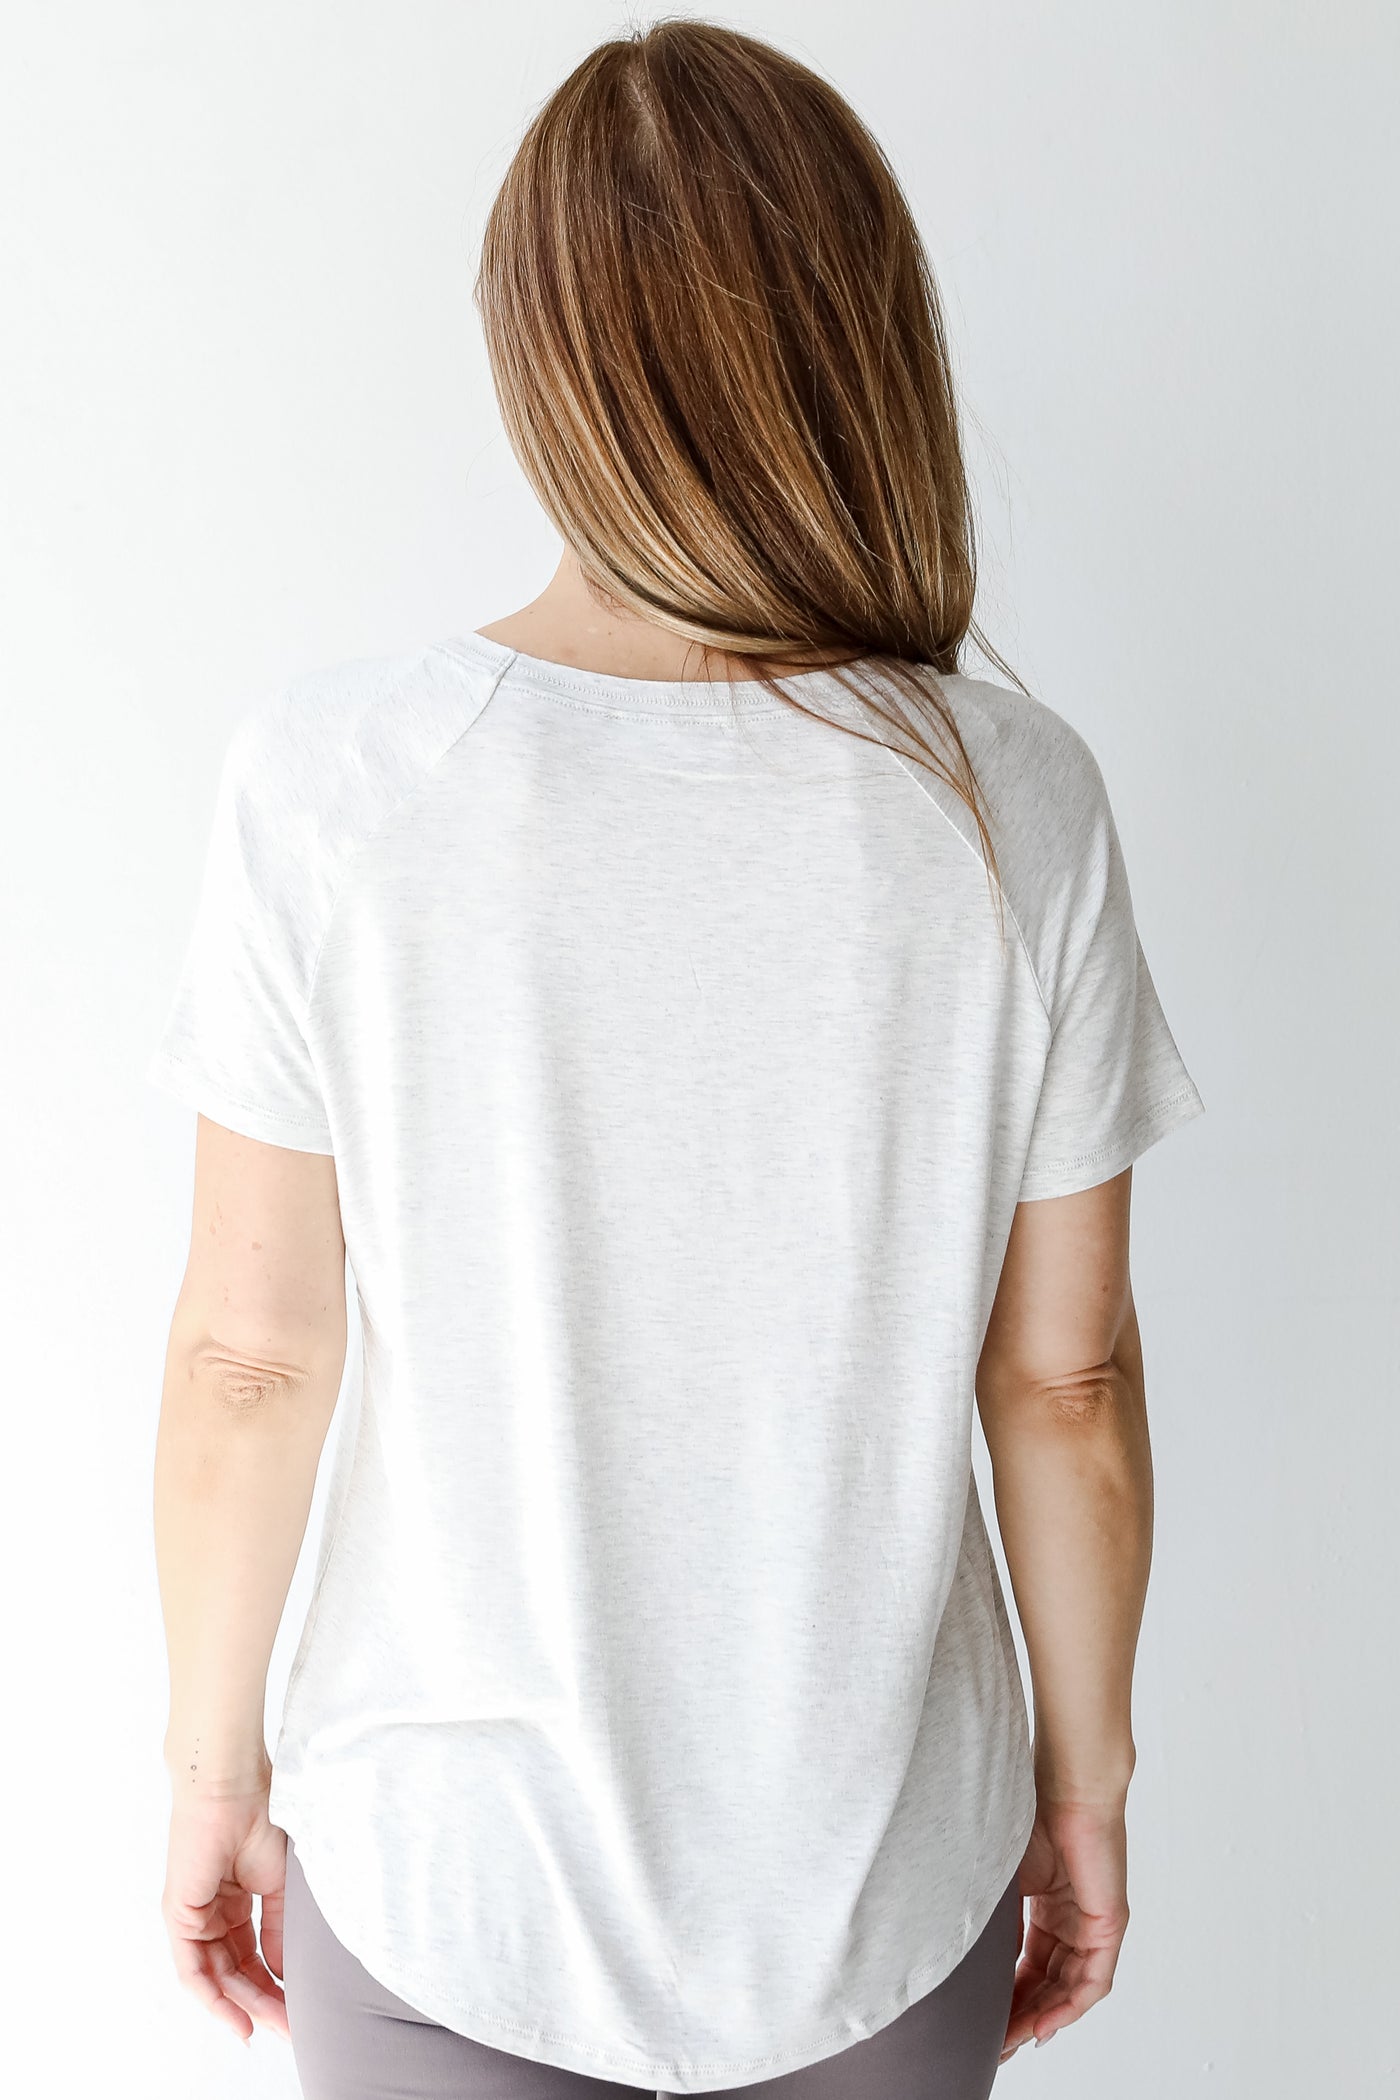 Everyday Tee in heather grey back view